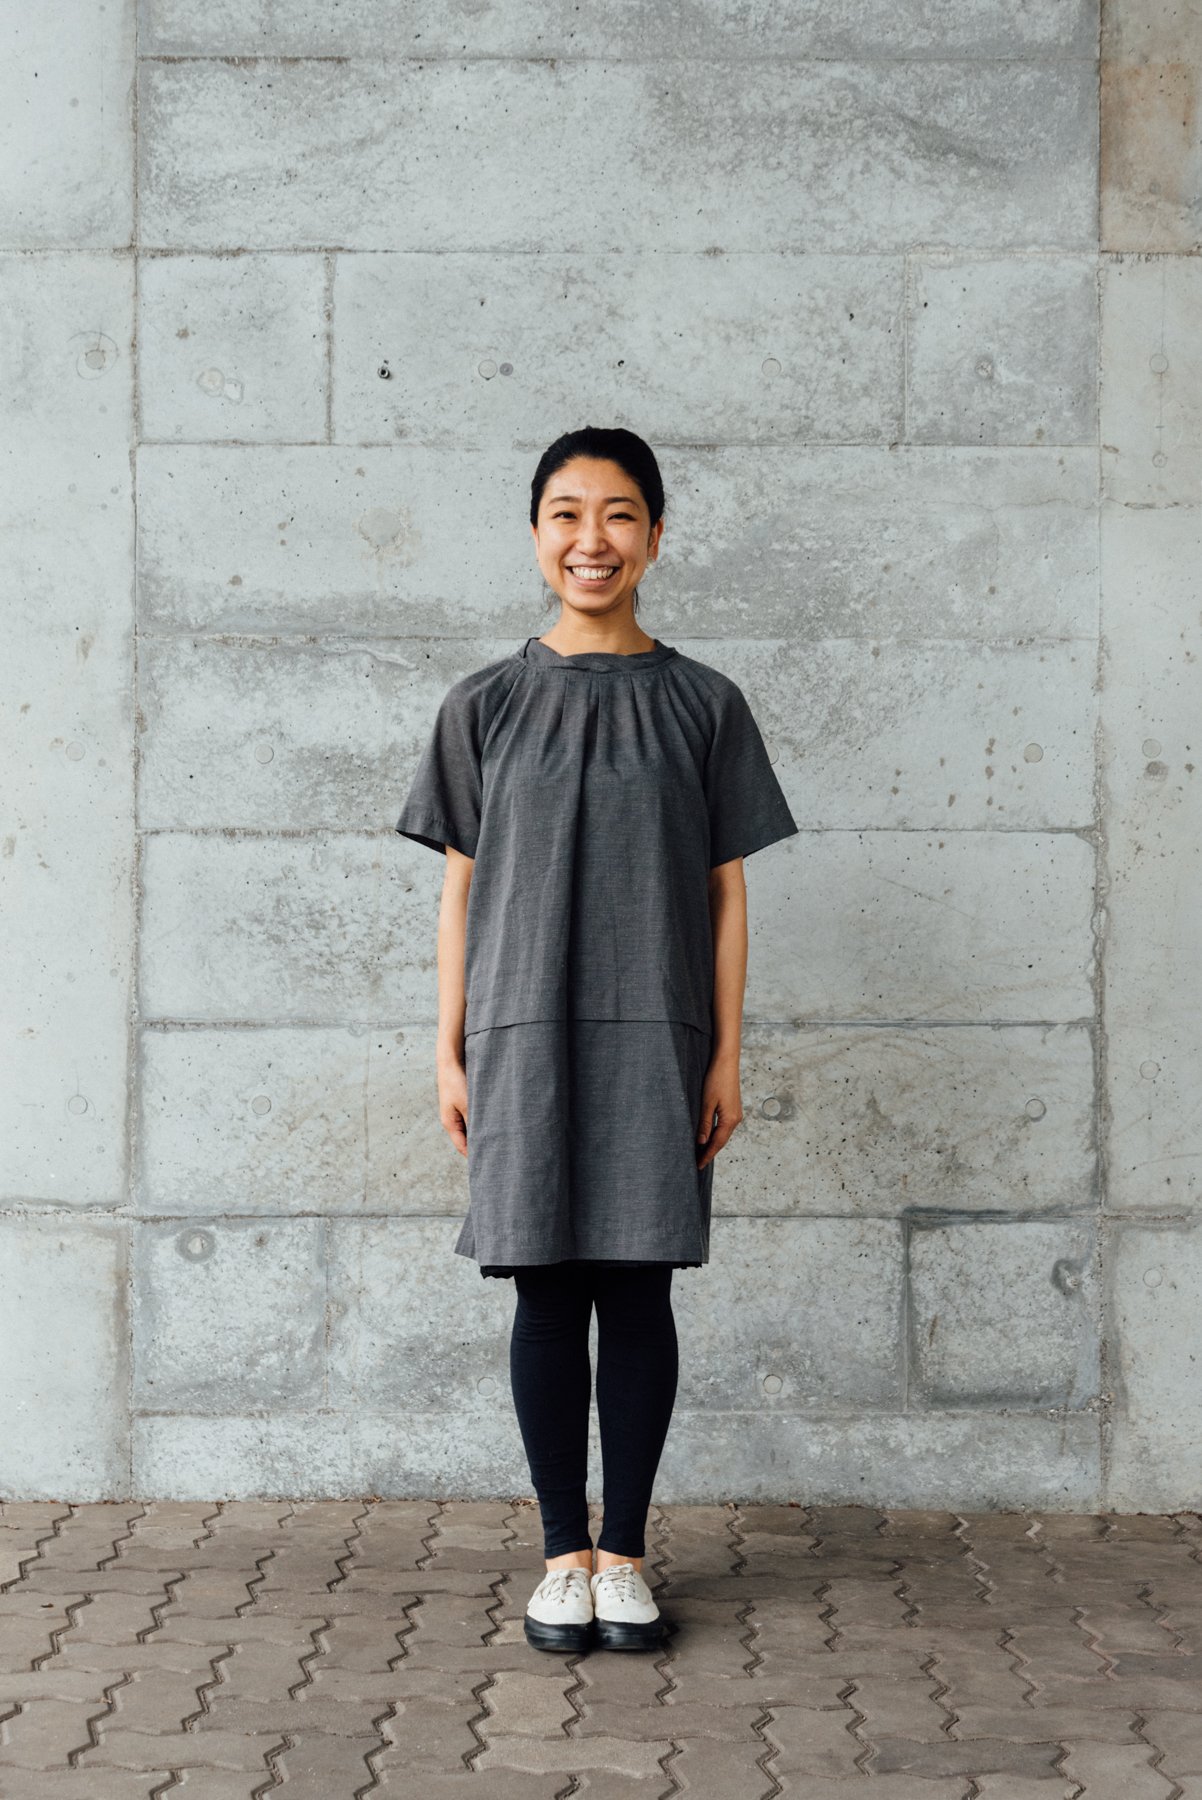  Dress: 90% POLYESTER 10% WOOL  Leggings:  95% COTTON 5% POLYURETHANE  Shoes:  CANVAS  (sole) RUBBER   “All are outgrown and will be discarded. The dress was given to me by a friend when I was 24."    ワンピース： ポリエステル　90% 毛　10%  レギンス： 綿　95% ポリウレタン　5%  靴